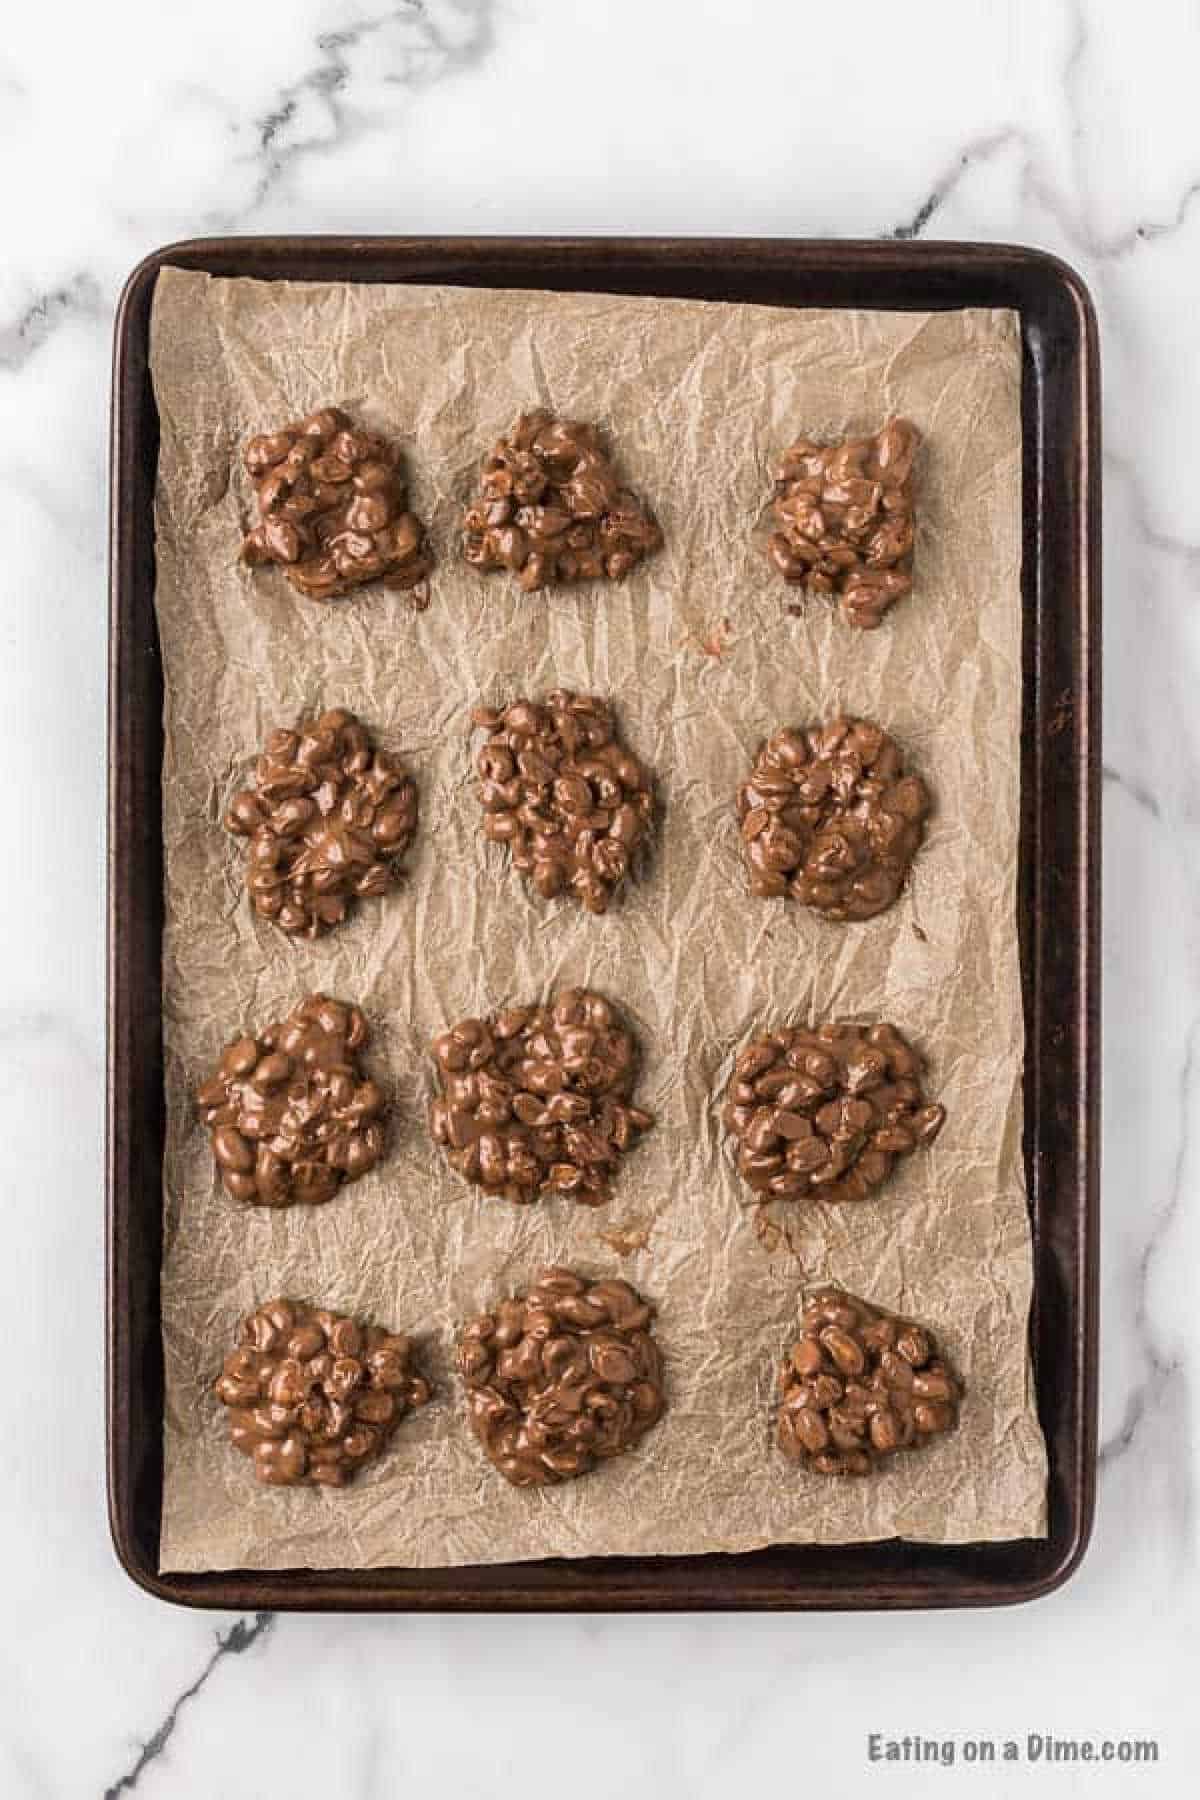 Chocolate peanut clusters on a baking sheet lined with parchment paper